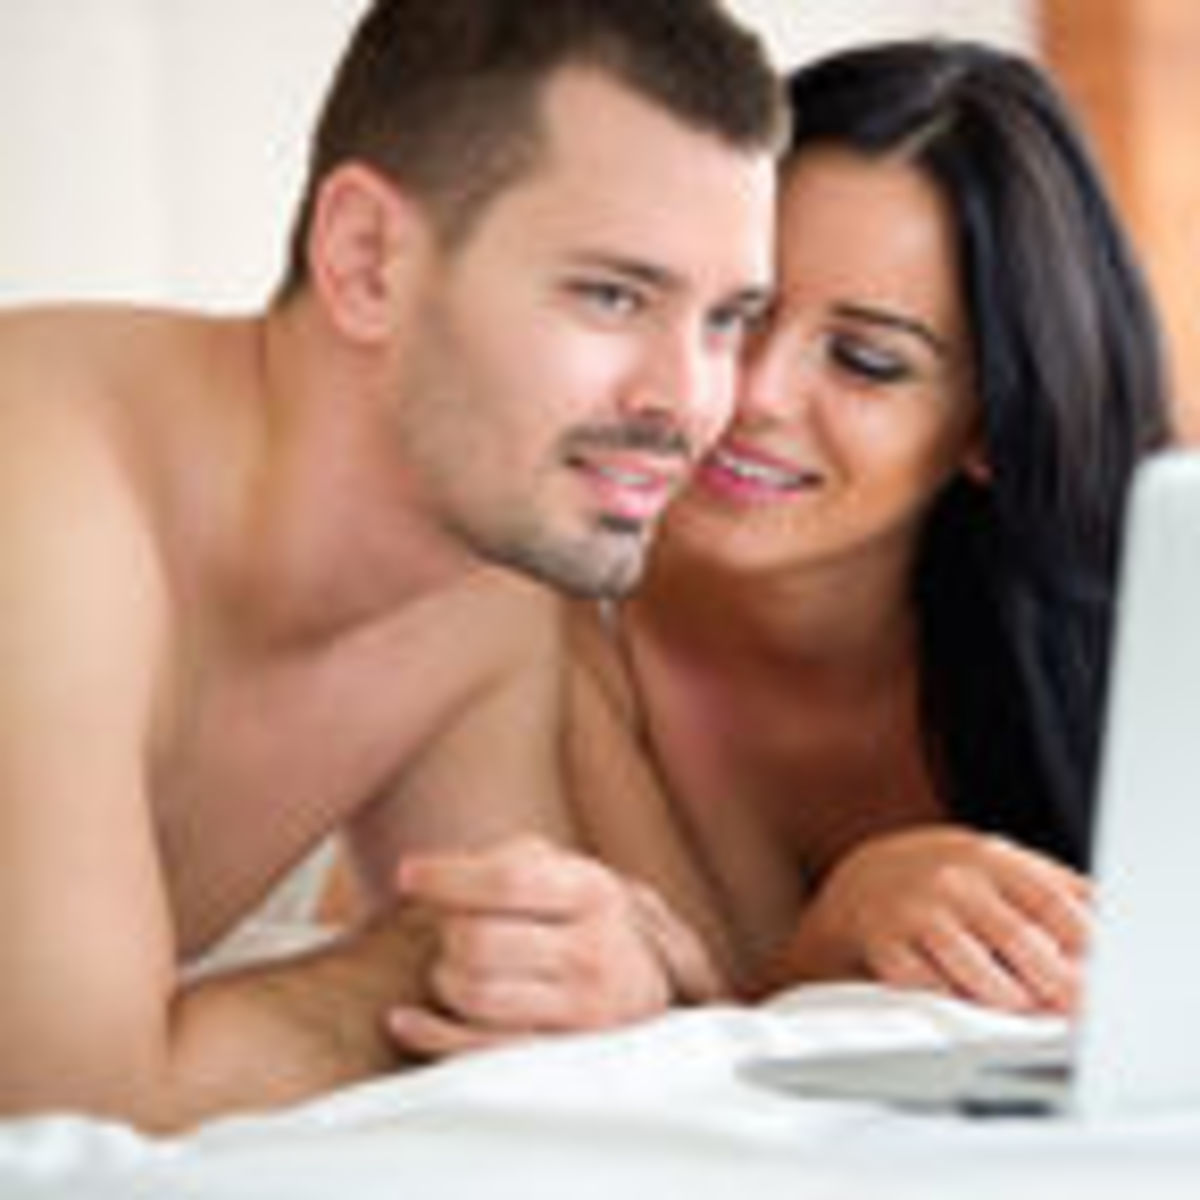 Bp Sex Watching - To View or Not to View? That Is the Question | Psychology Today